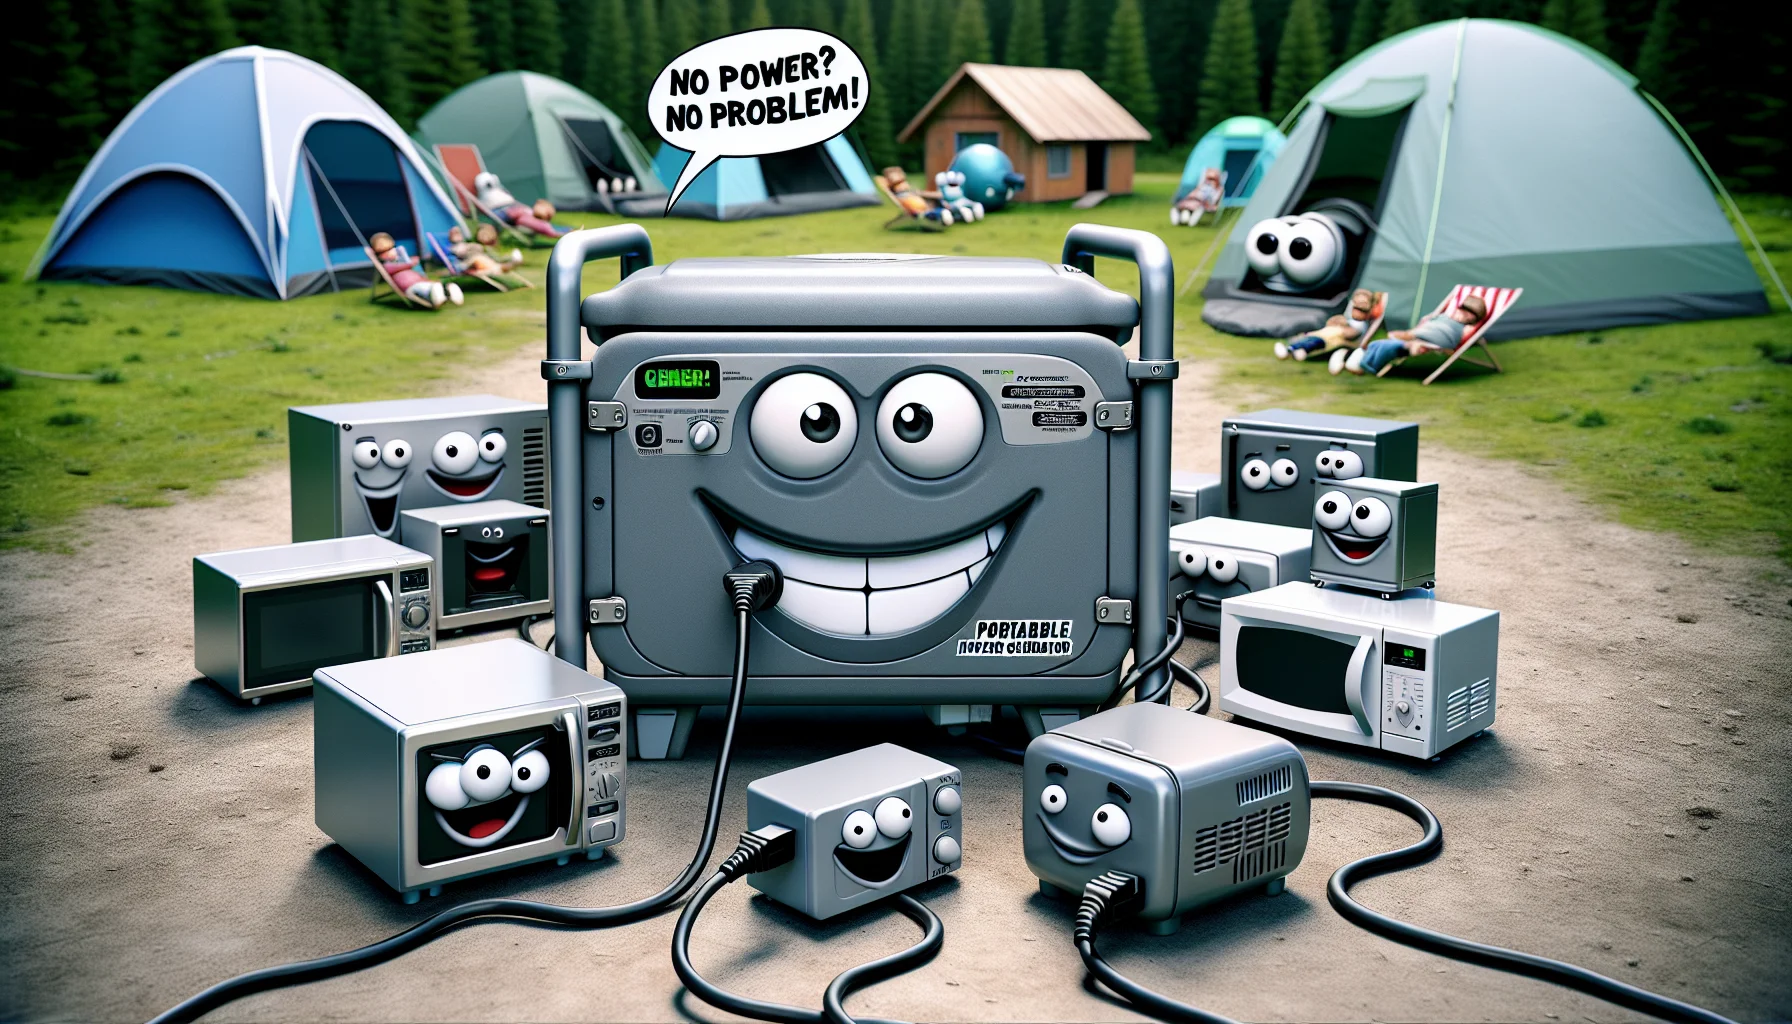 Create a detailed image of a grey portable inverter generator, humorously designed with cartoon-like eyes and a wide grin, enticing people to generate electricity. Have the generator situated against a lush, green campsite background, with a crowd of animated home appliances eagerly gathering around it. Feature a refrigerator, a microwave oven, and a television set, all with cartoon eyes and smiles, seemingly in awe of the generator's power. Their power cords trail behind them, connecting to the generator. Add a text bubble above the grinning generator saying, 'No Power? No Problem!'